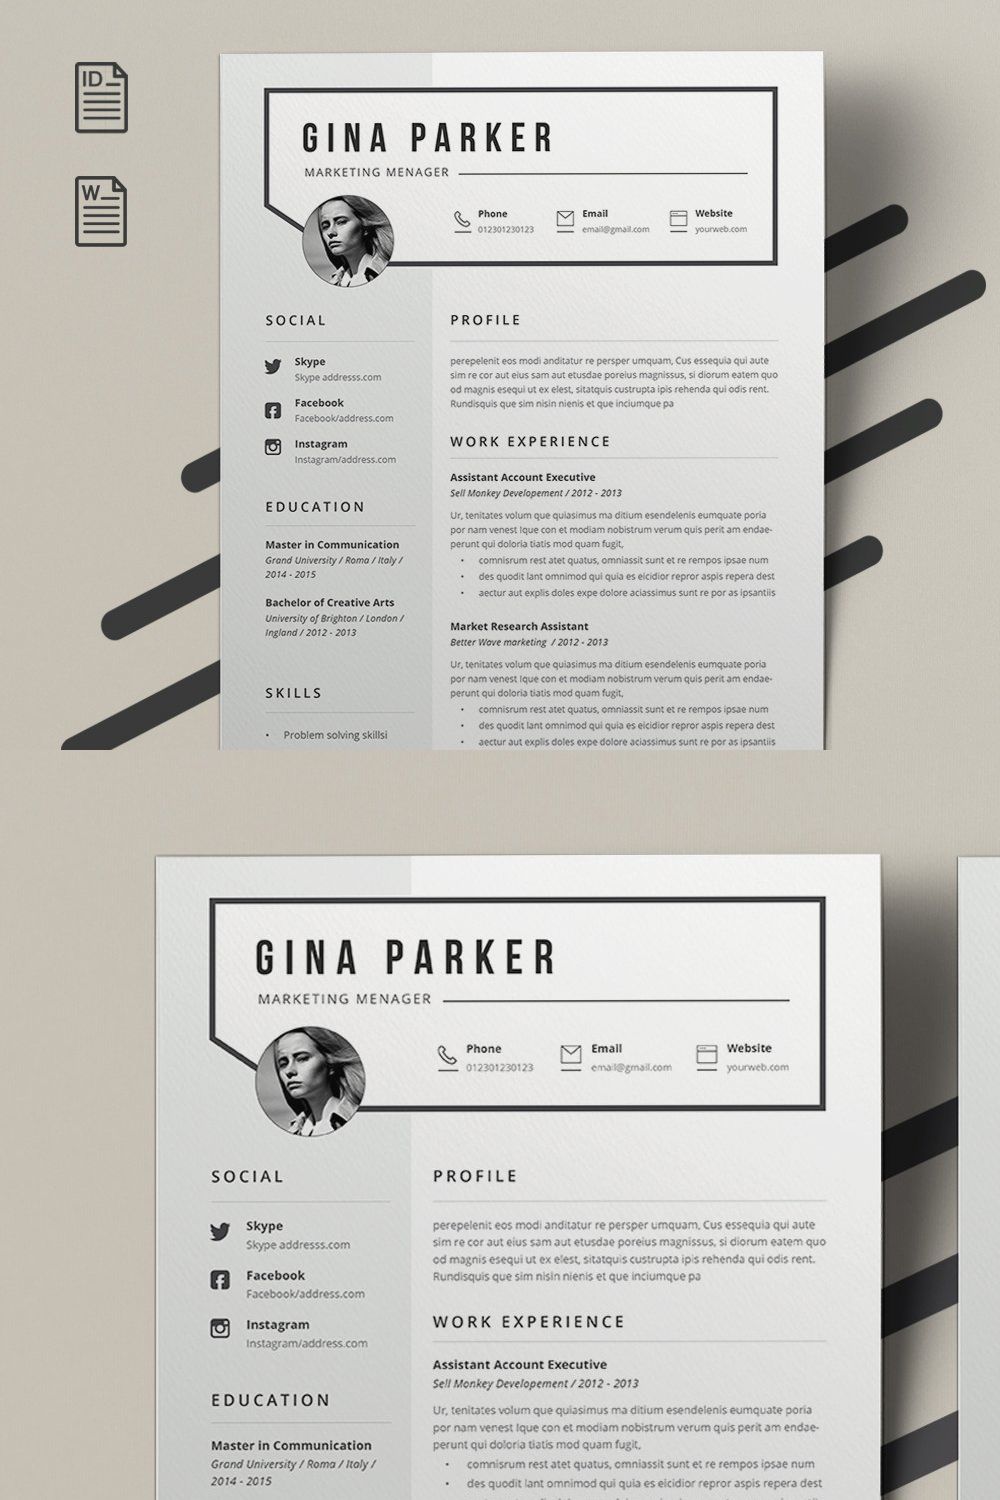 Resume Gina pinterest preview image.